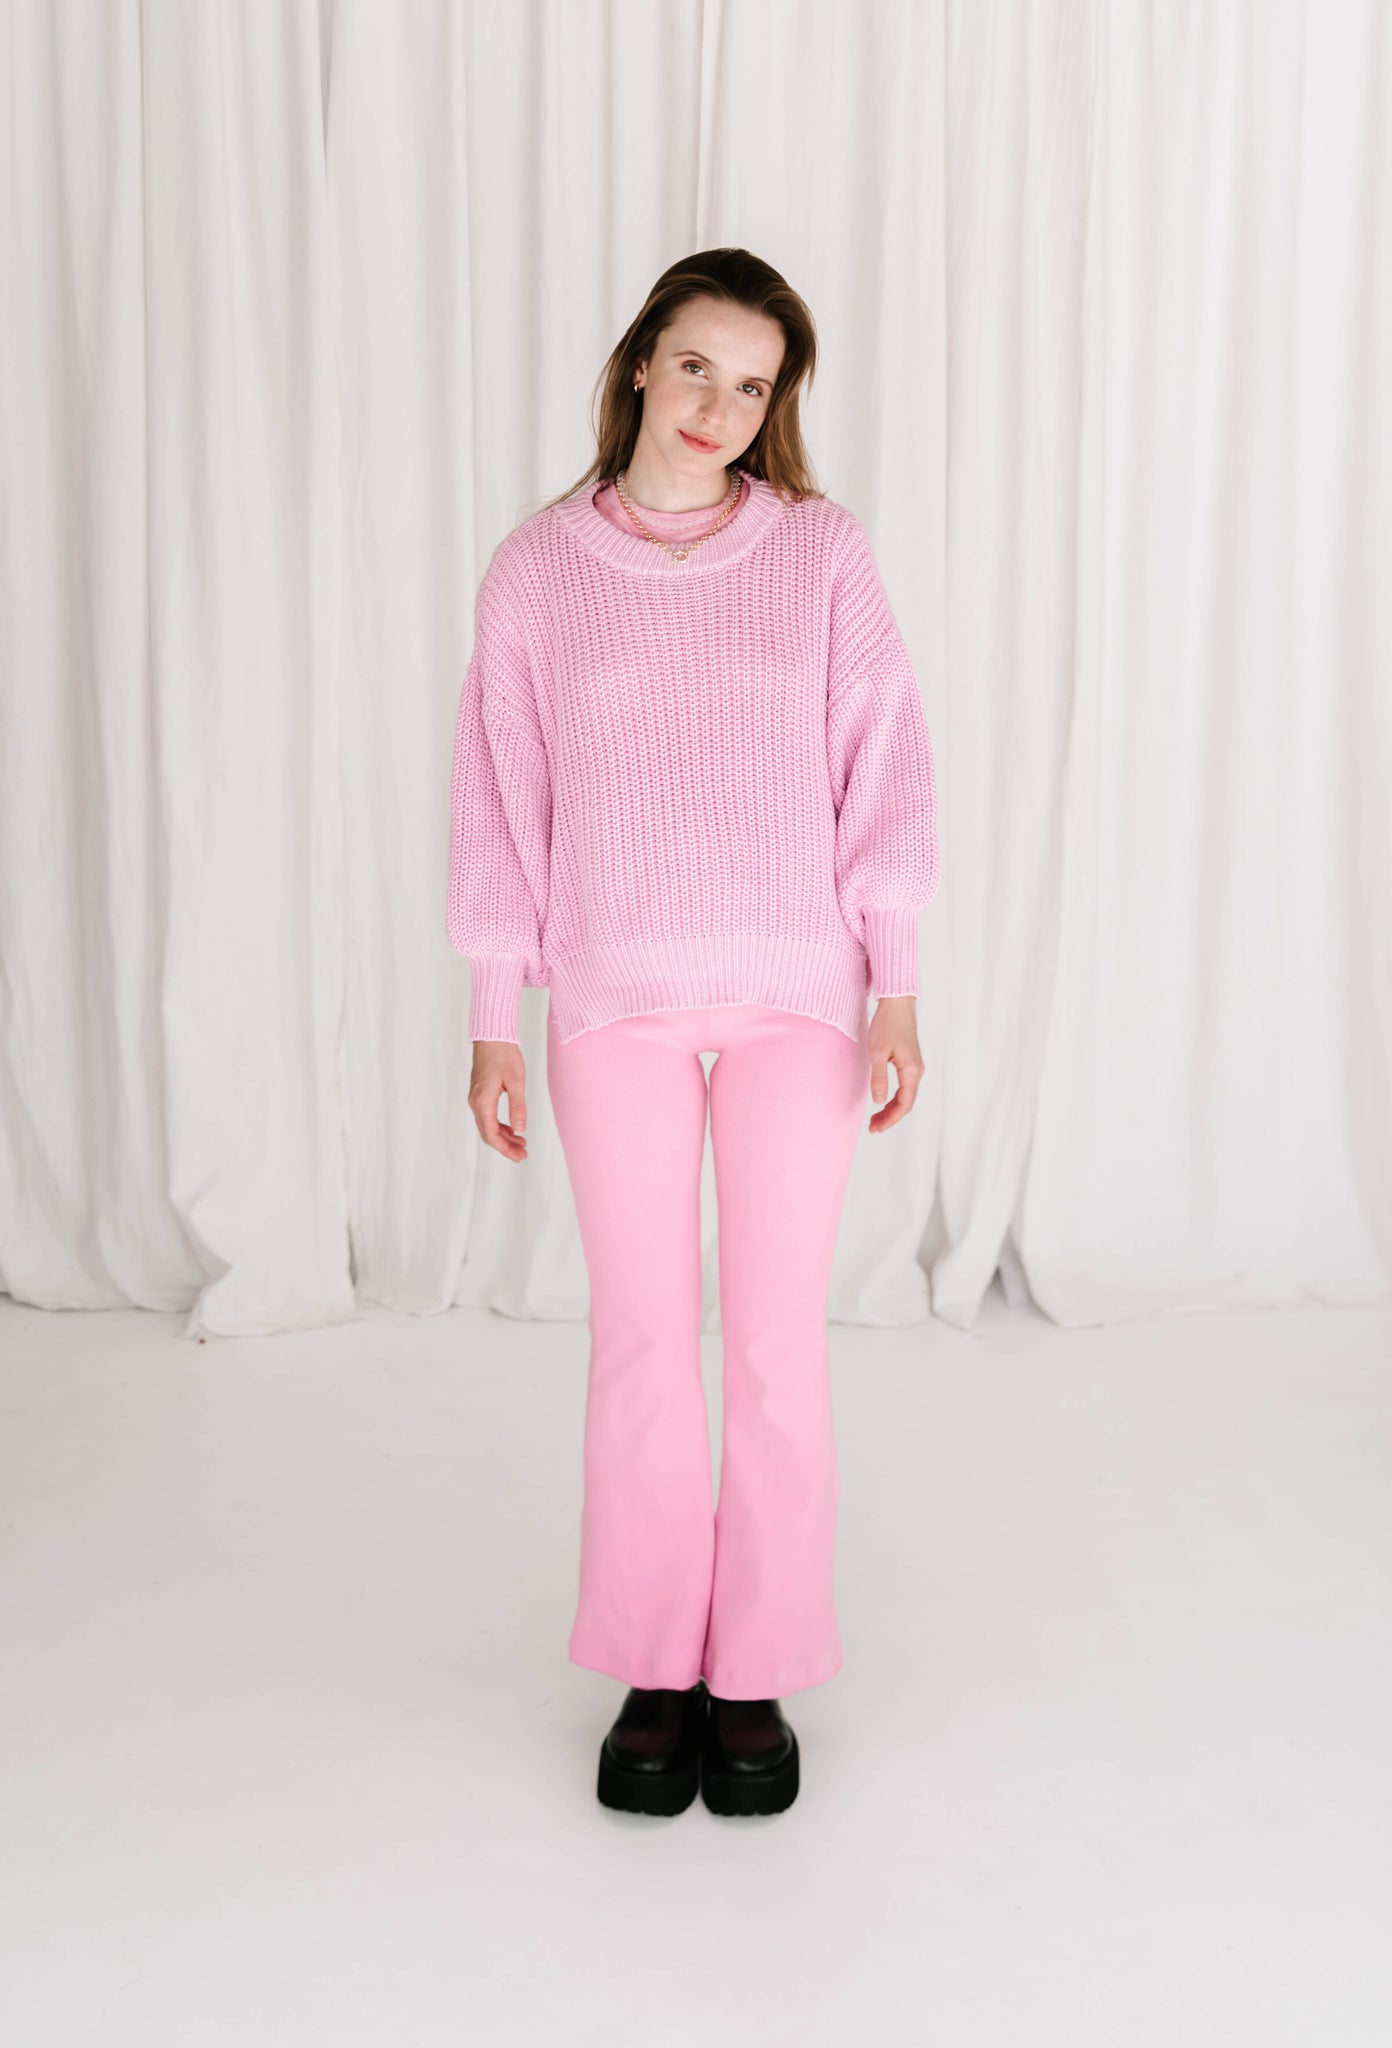 womens cable knit jumper wool cotton blend soft relaxed fit with balloon billowy sleeve feature in hibiscus pink purple